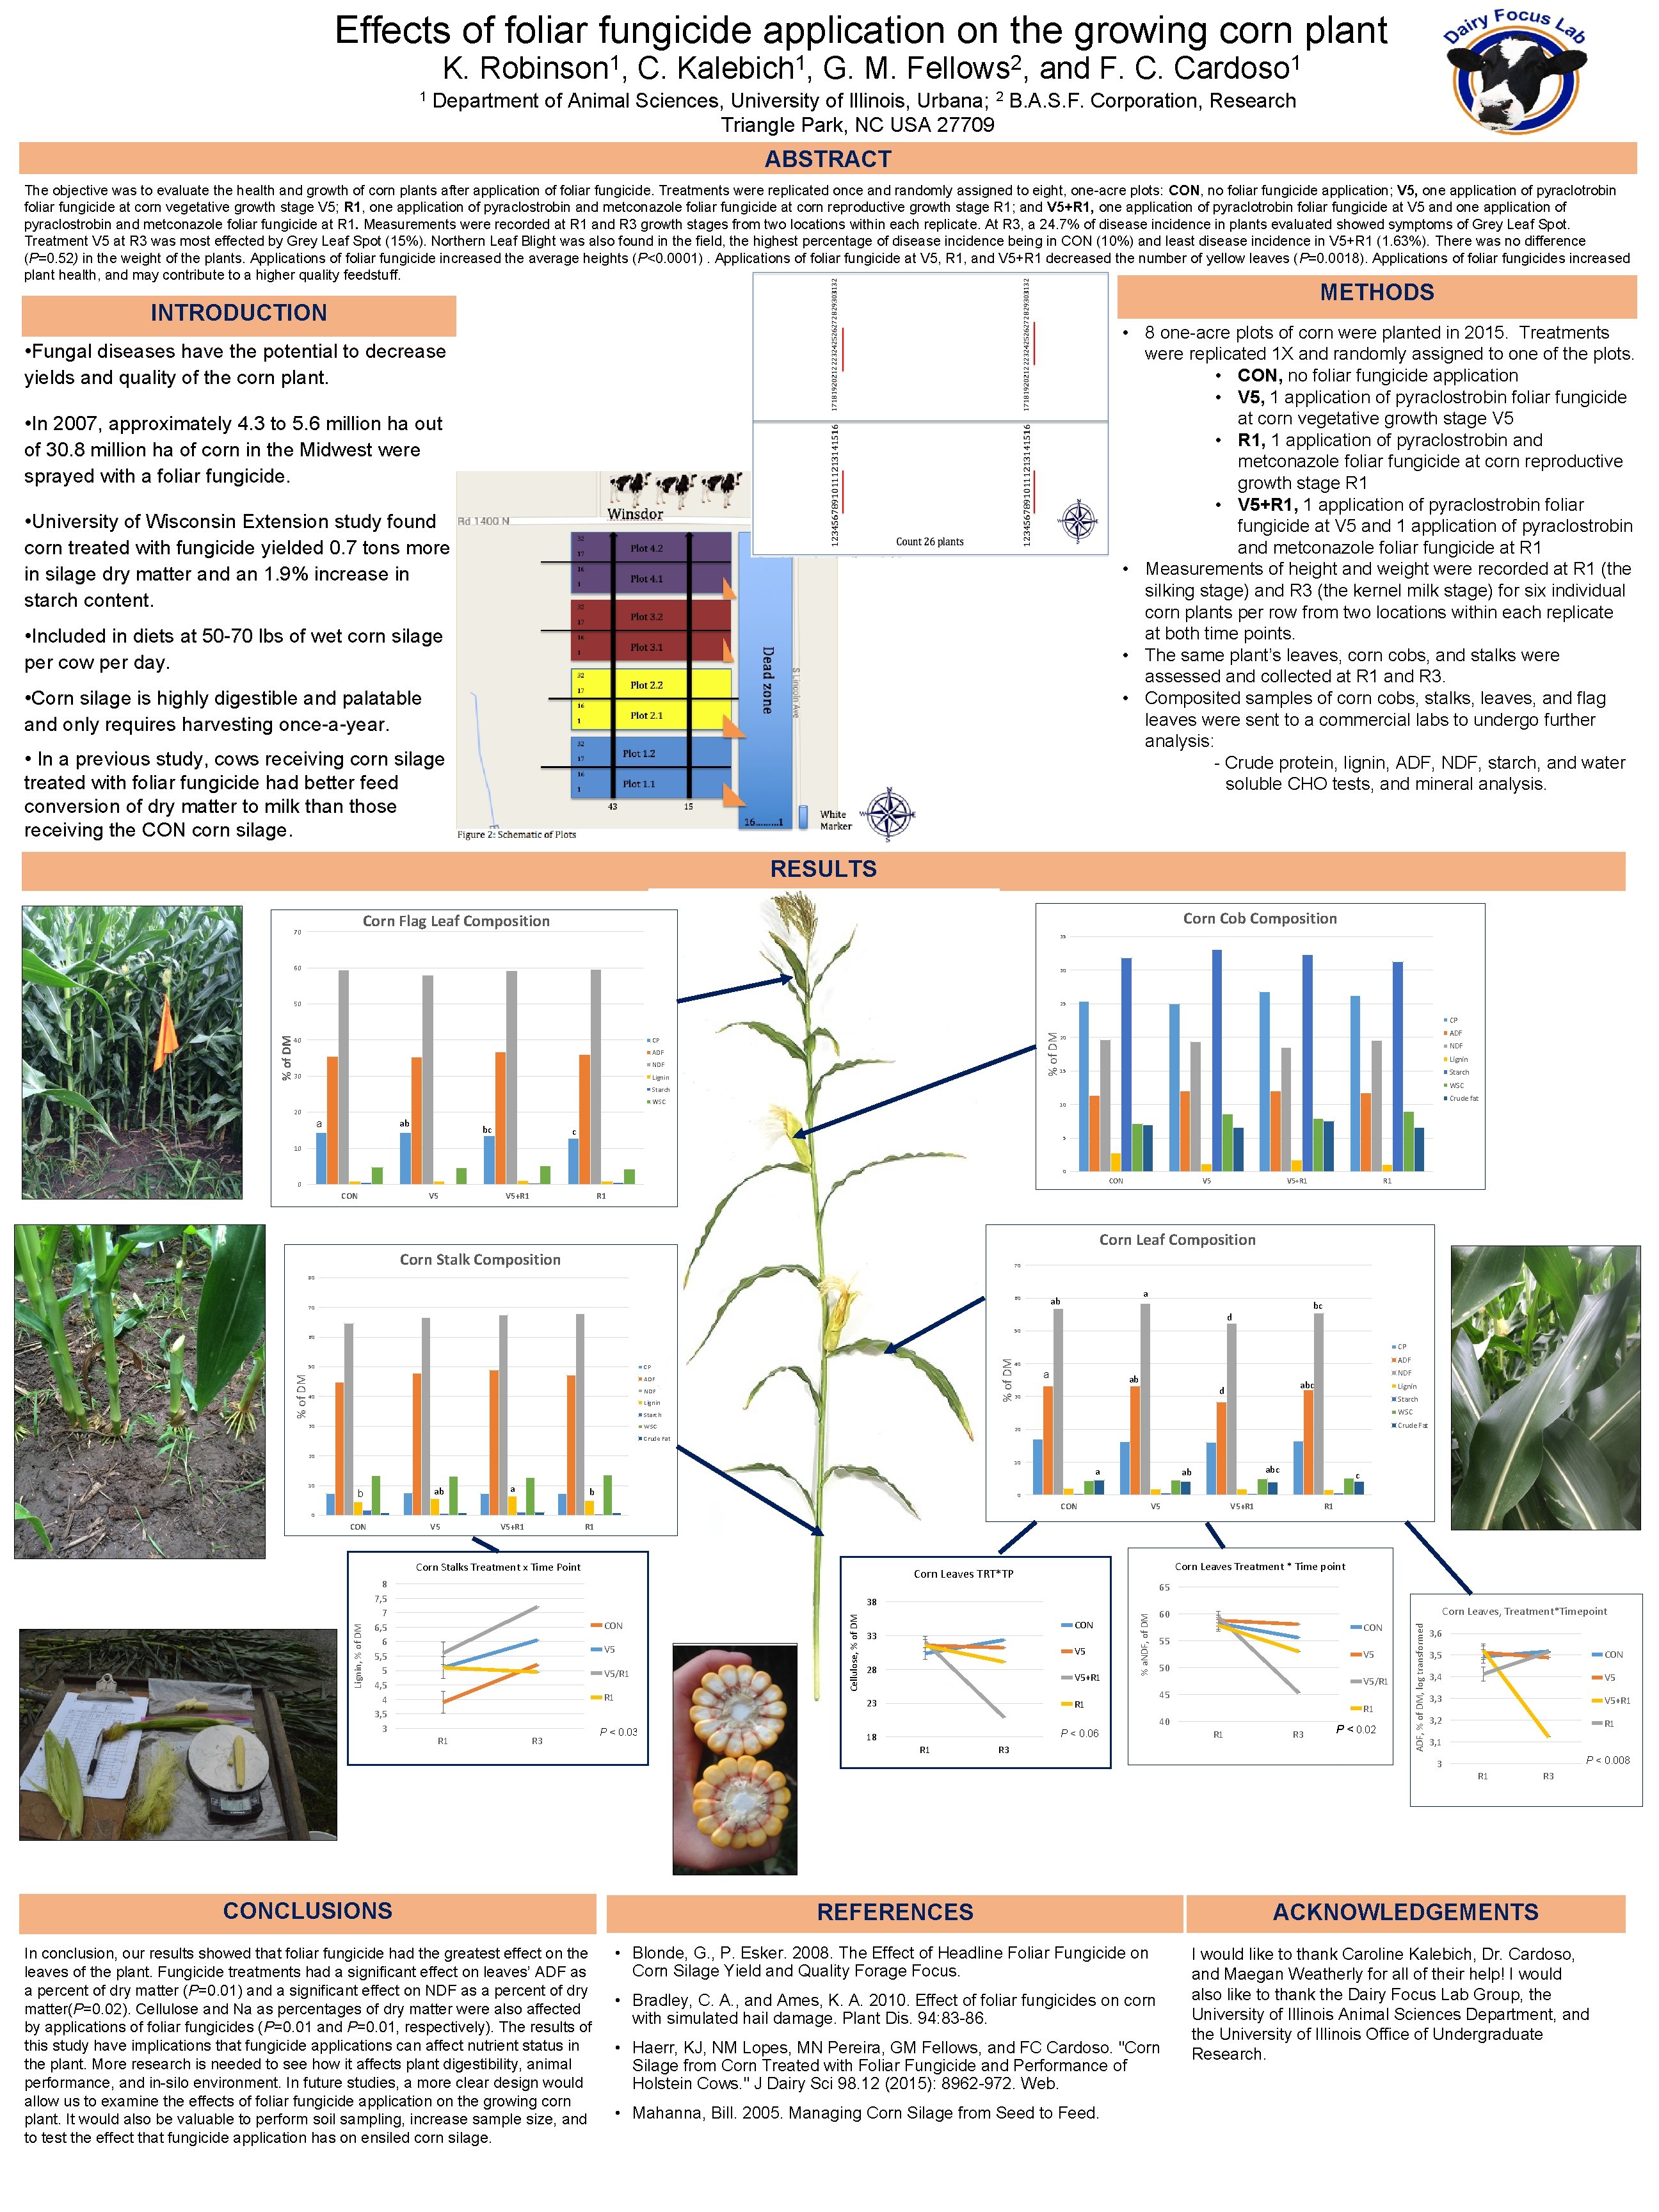 Effects of foliar fungicide application on the growing corn plant K. Robinson 1, C.